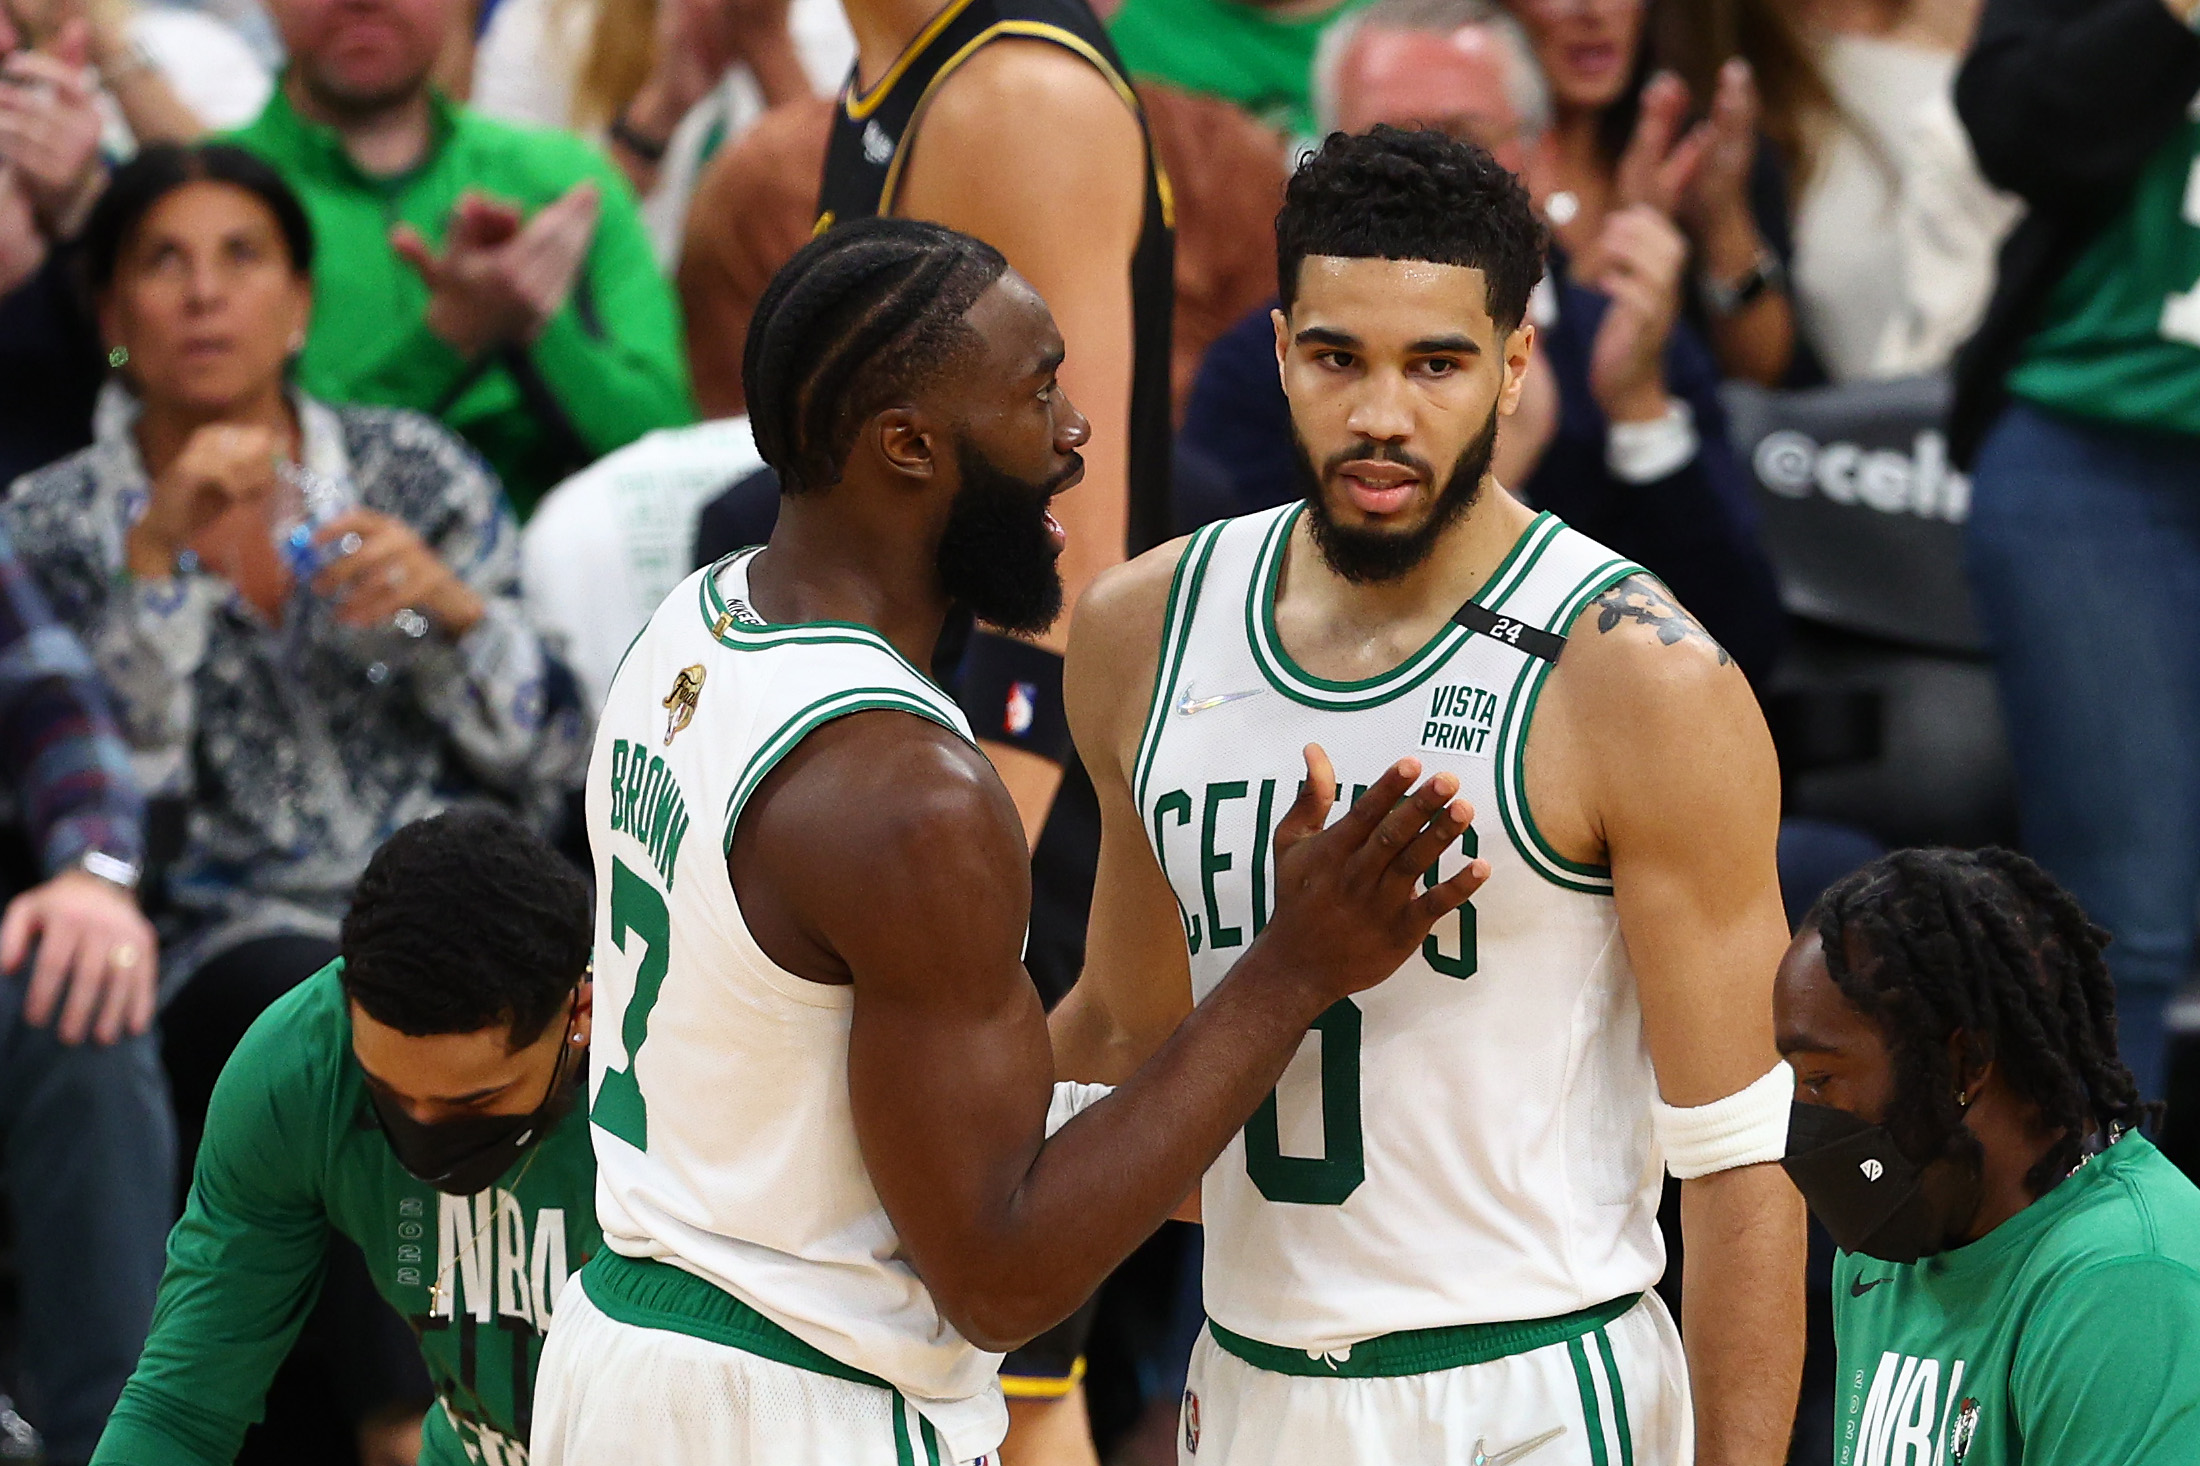 Jaylen Brown #7 and Jayson Tatum #0 of the Boston Celtics talk over a play in the second quarter.